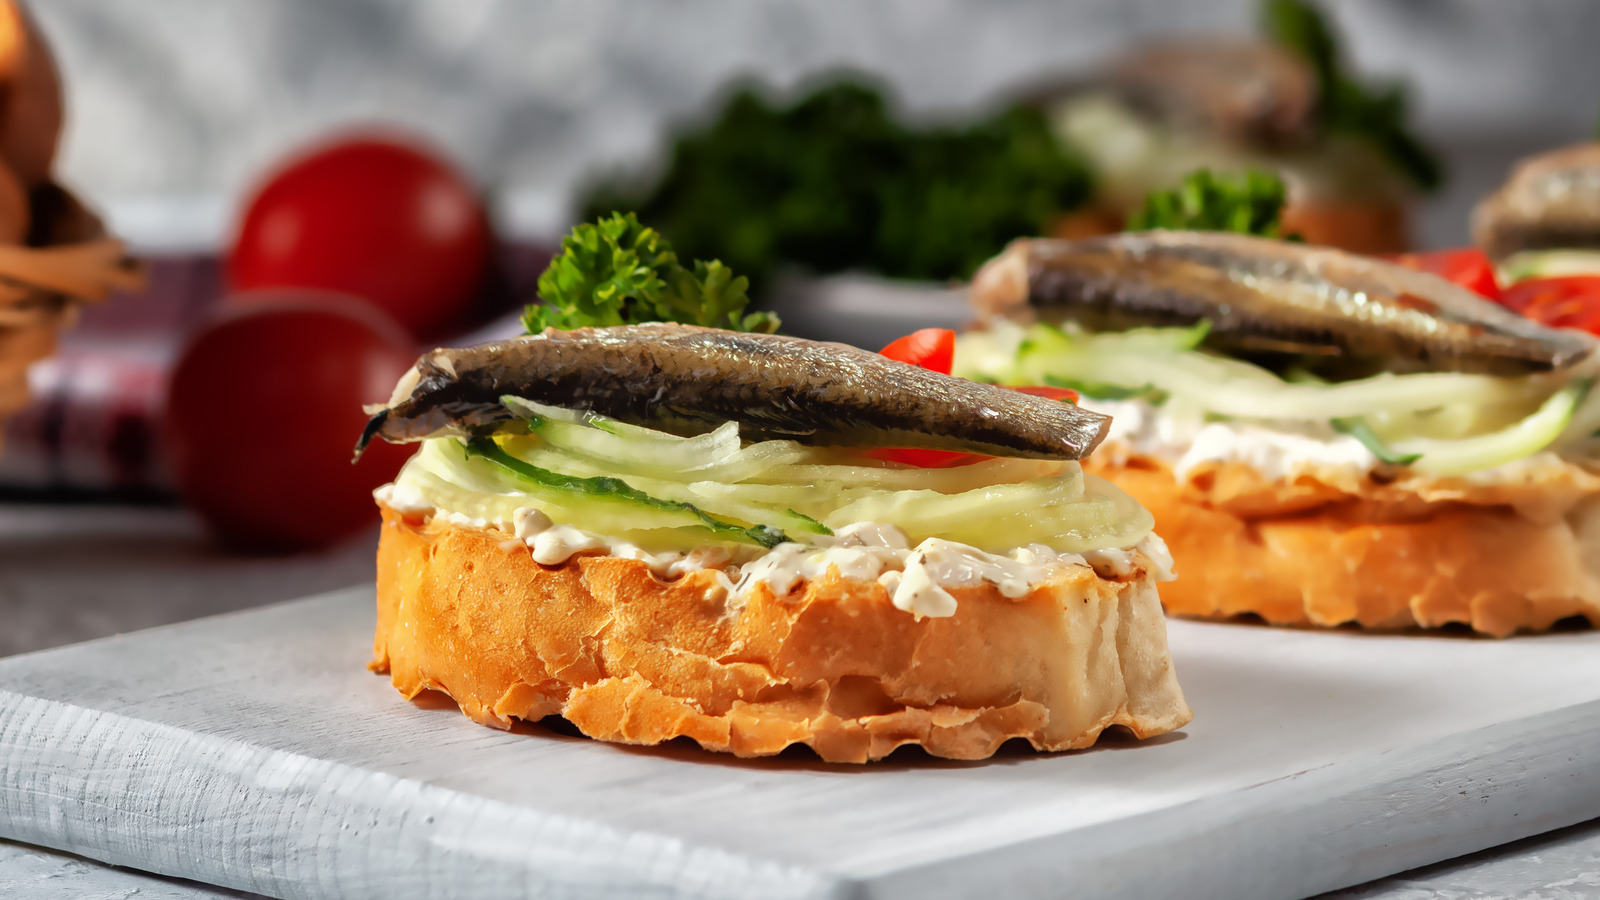 https://www.thedailymeal.com/img/gallery/the-absolute-best-bread-for-canned-fish-toast-according-to-chefs/l-intro-1678830448.jpg